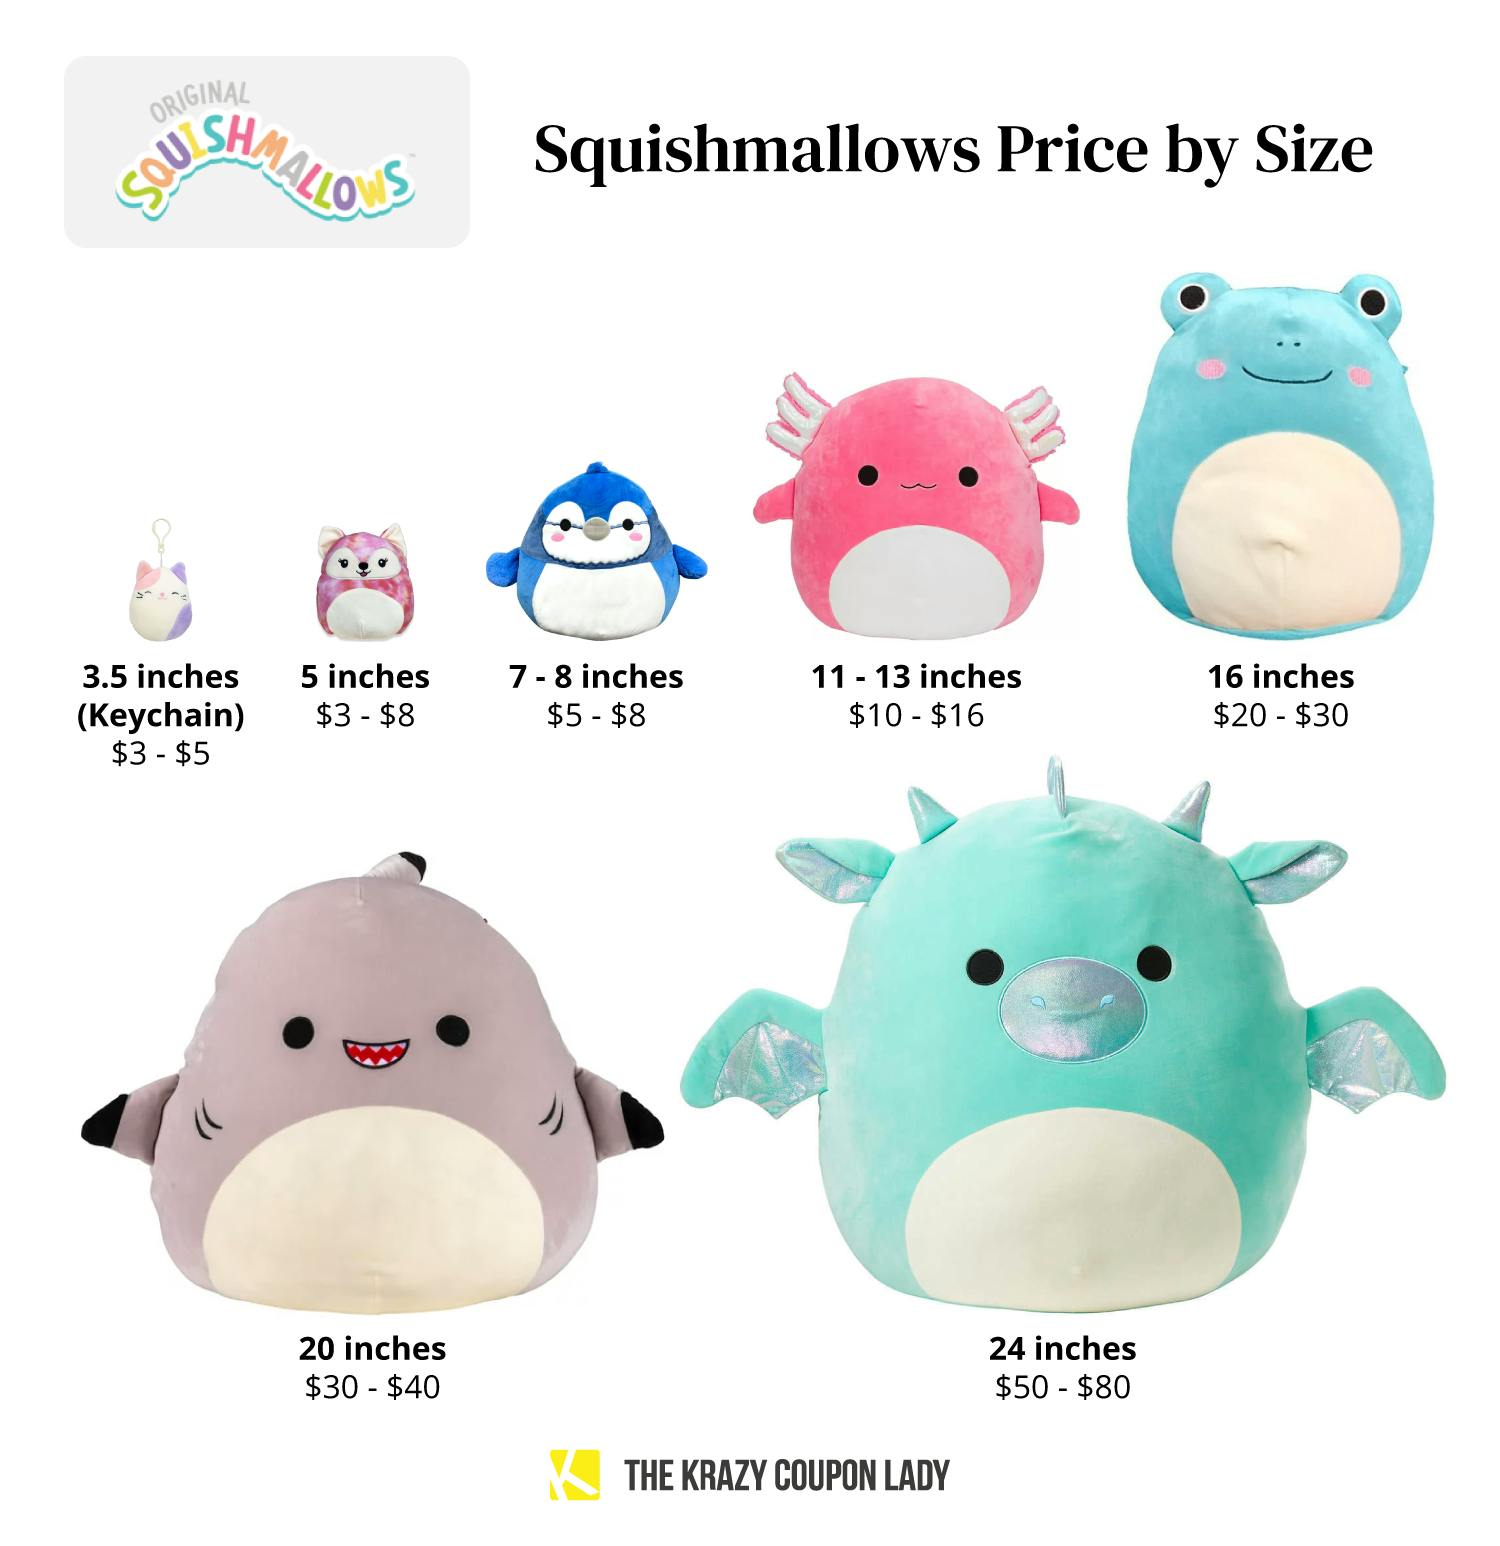 graphic of squishmallows priced by size